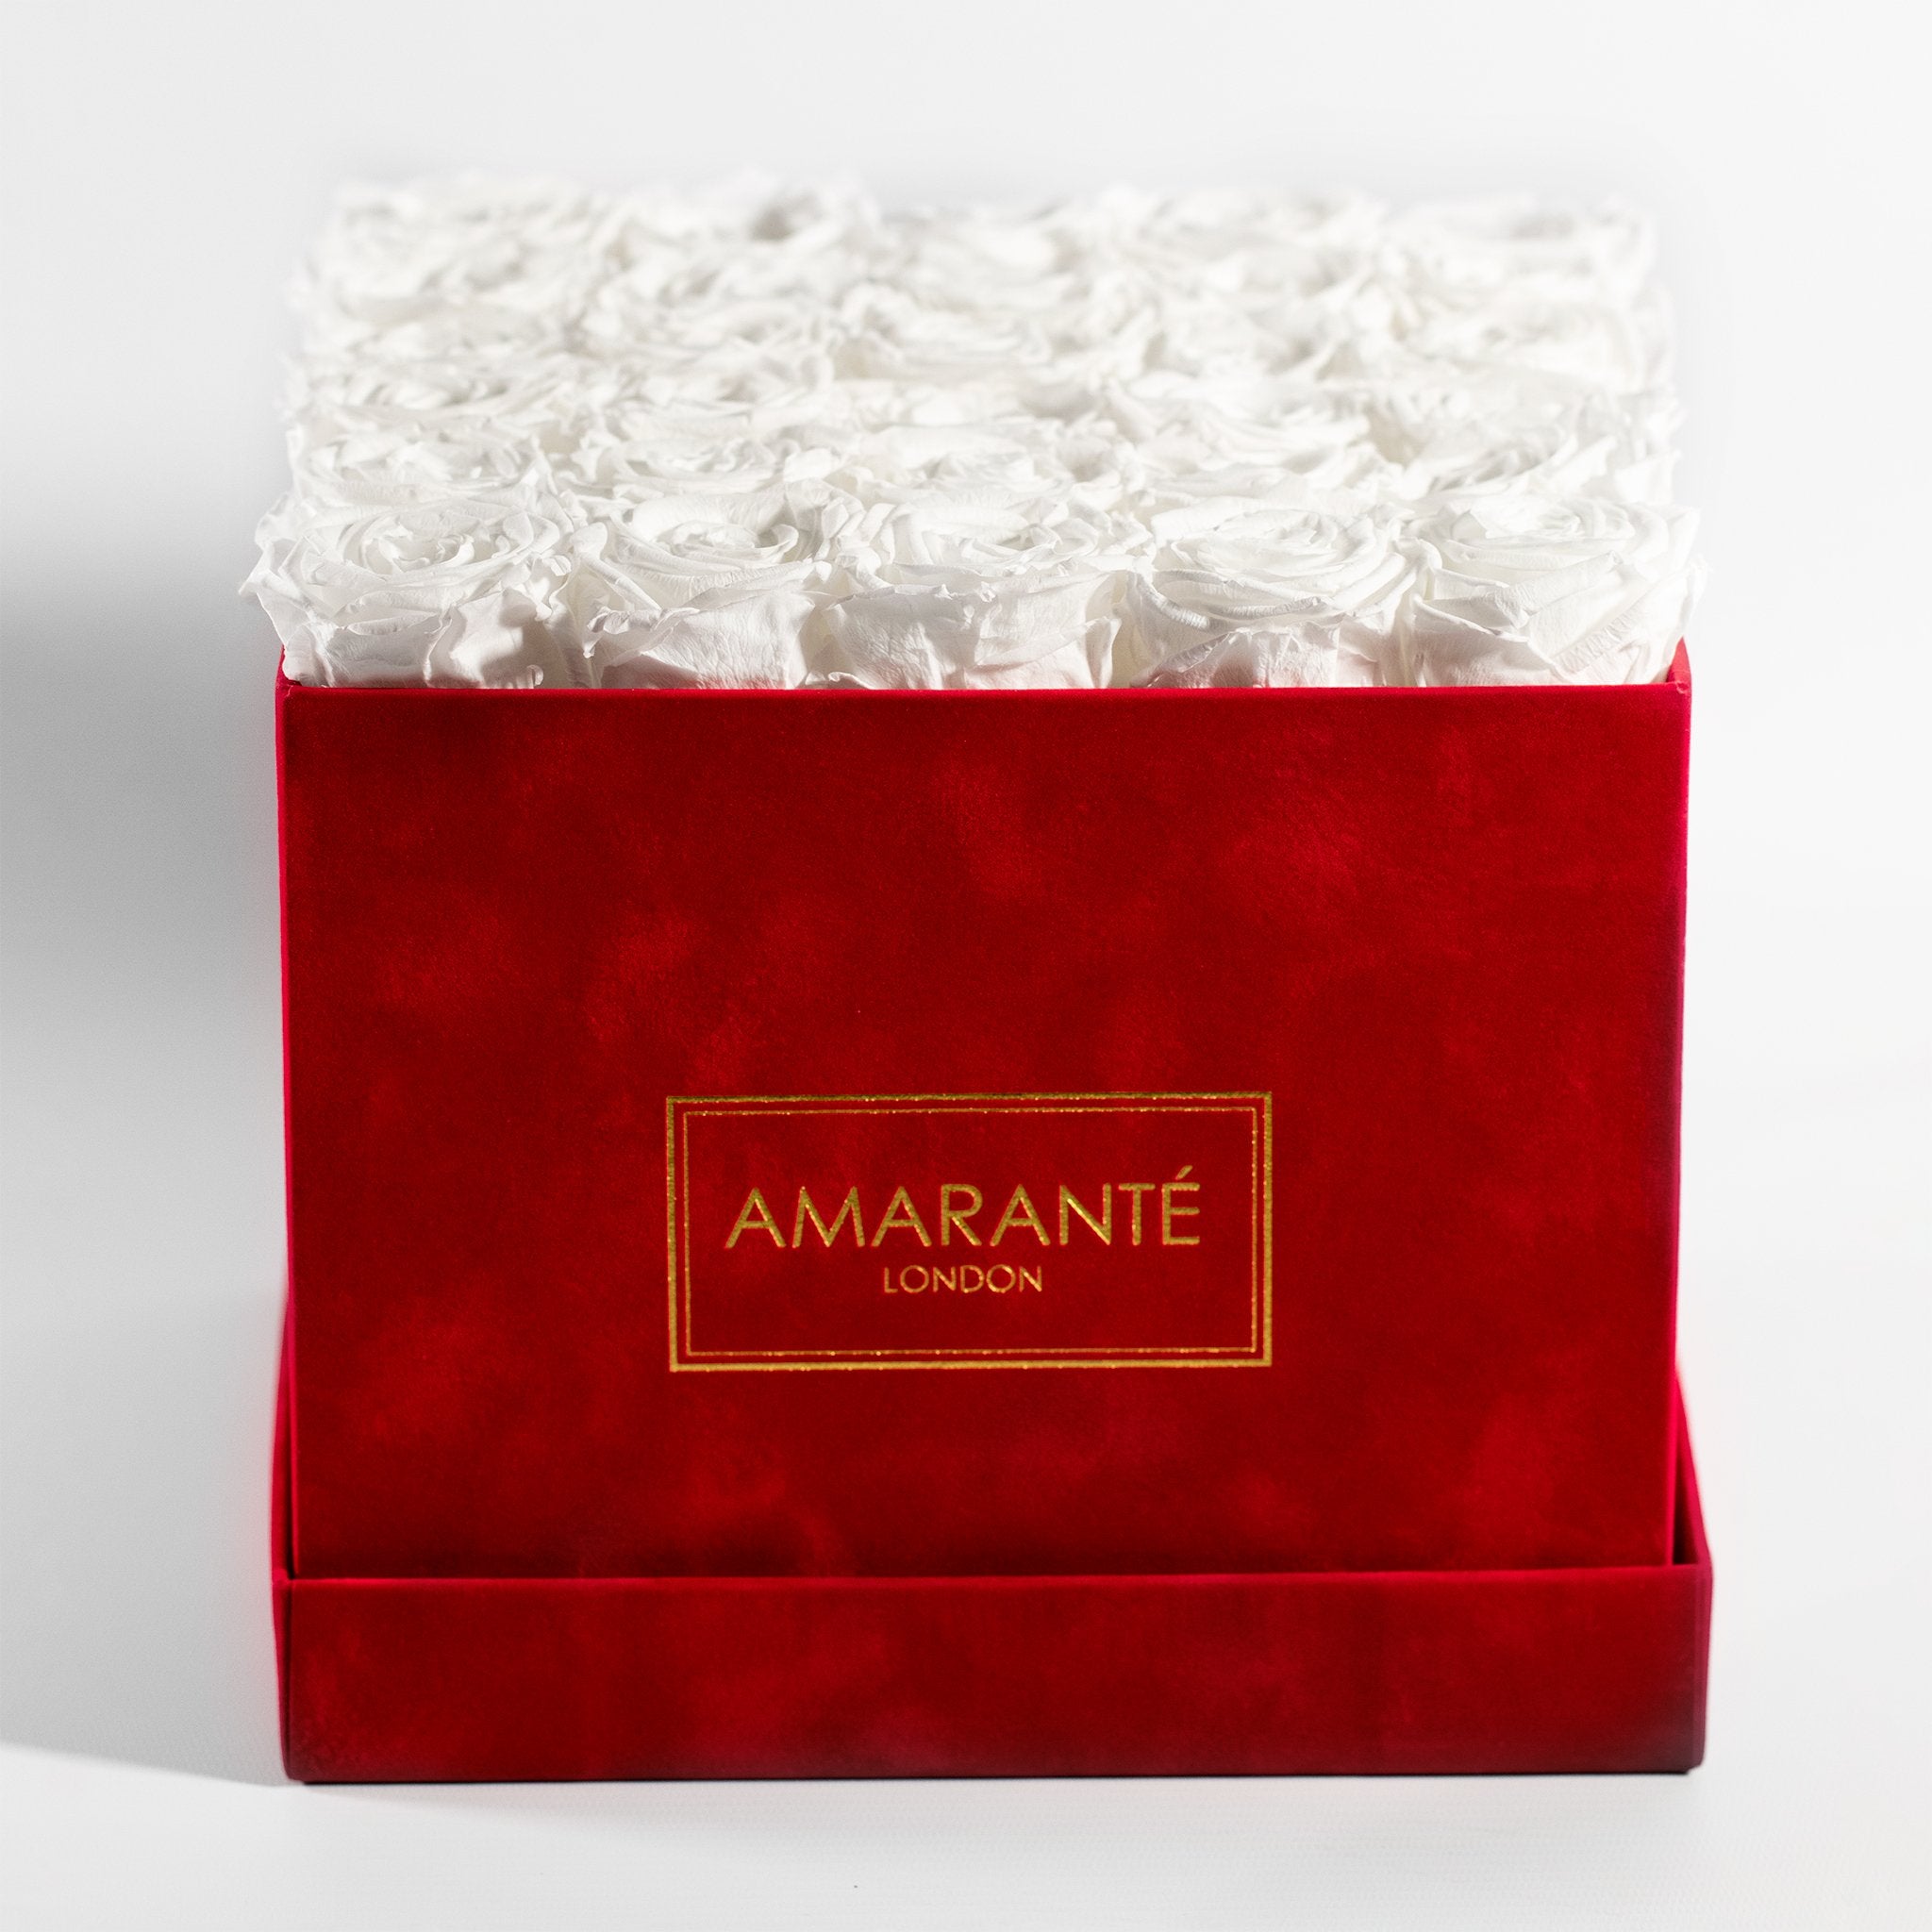 Chic white Roses imbedded perfectly into an idyllic red package. 